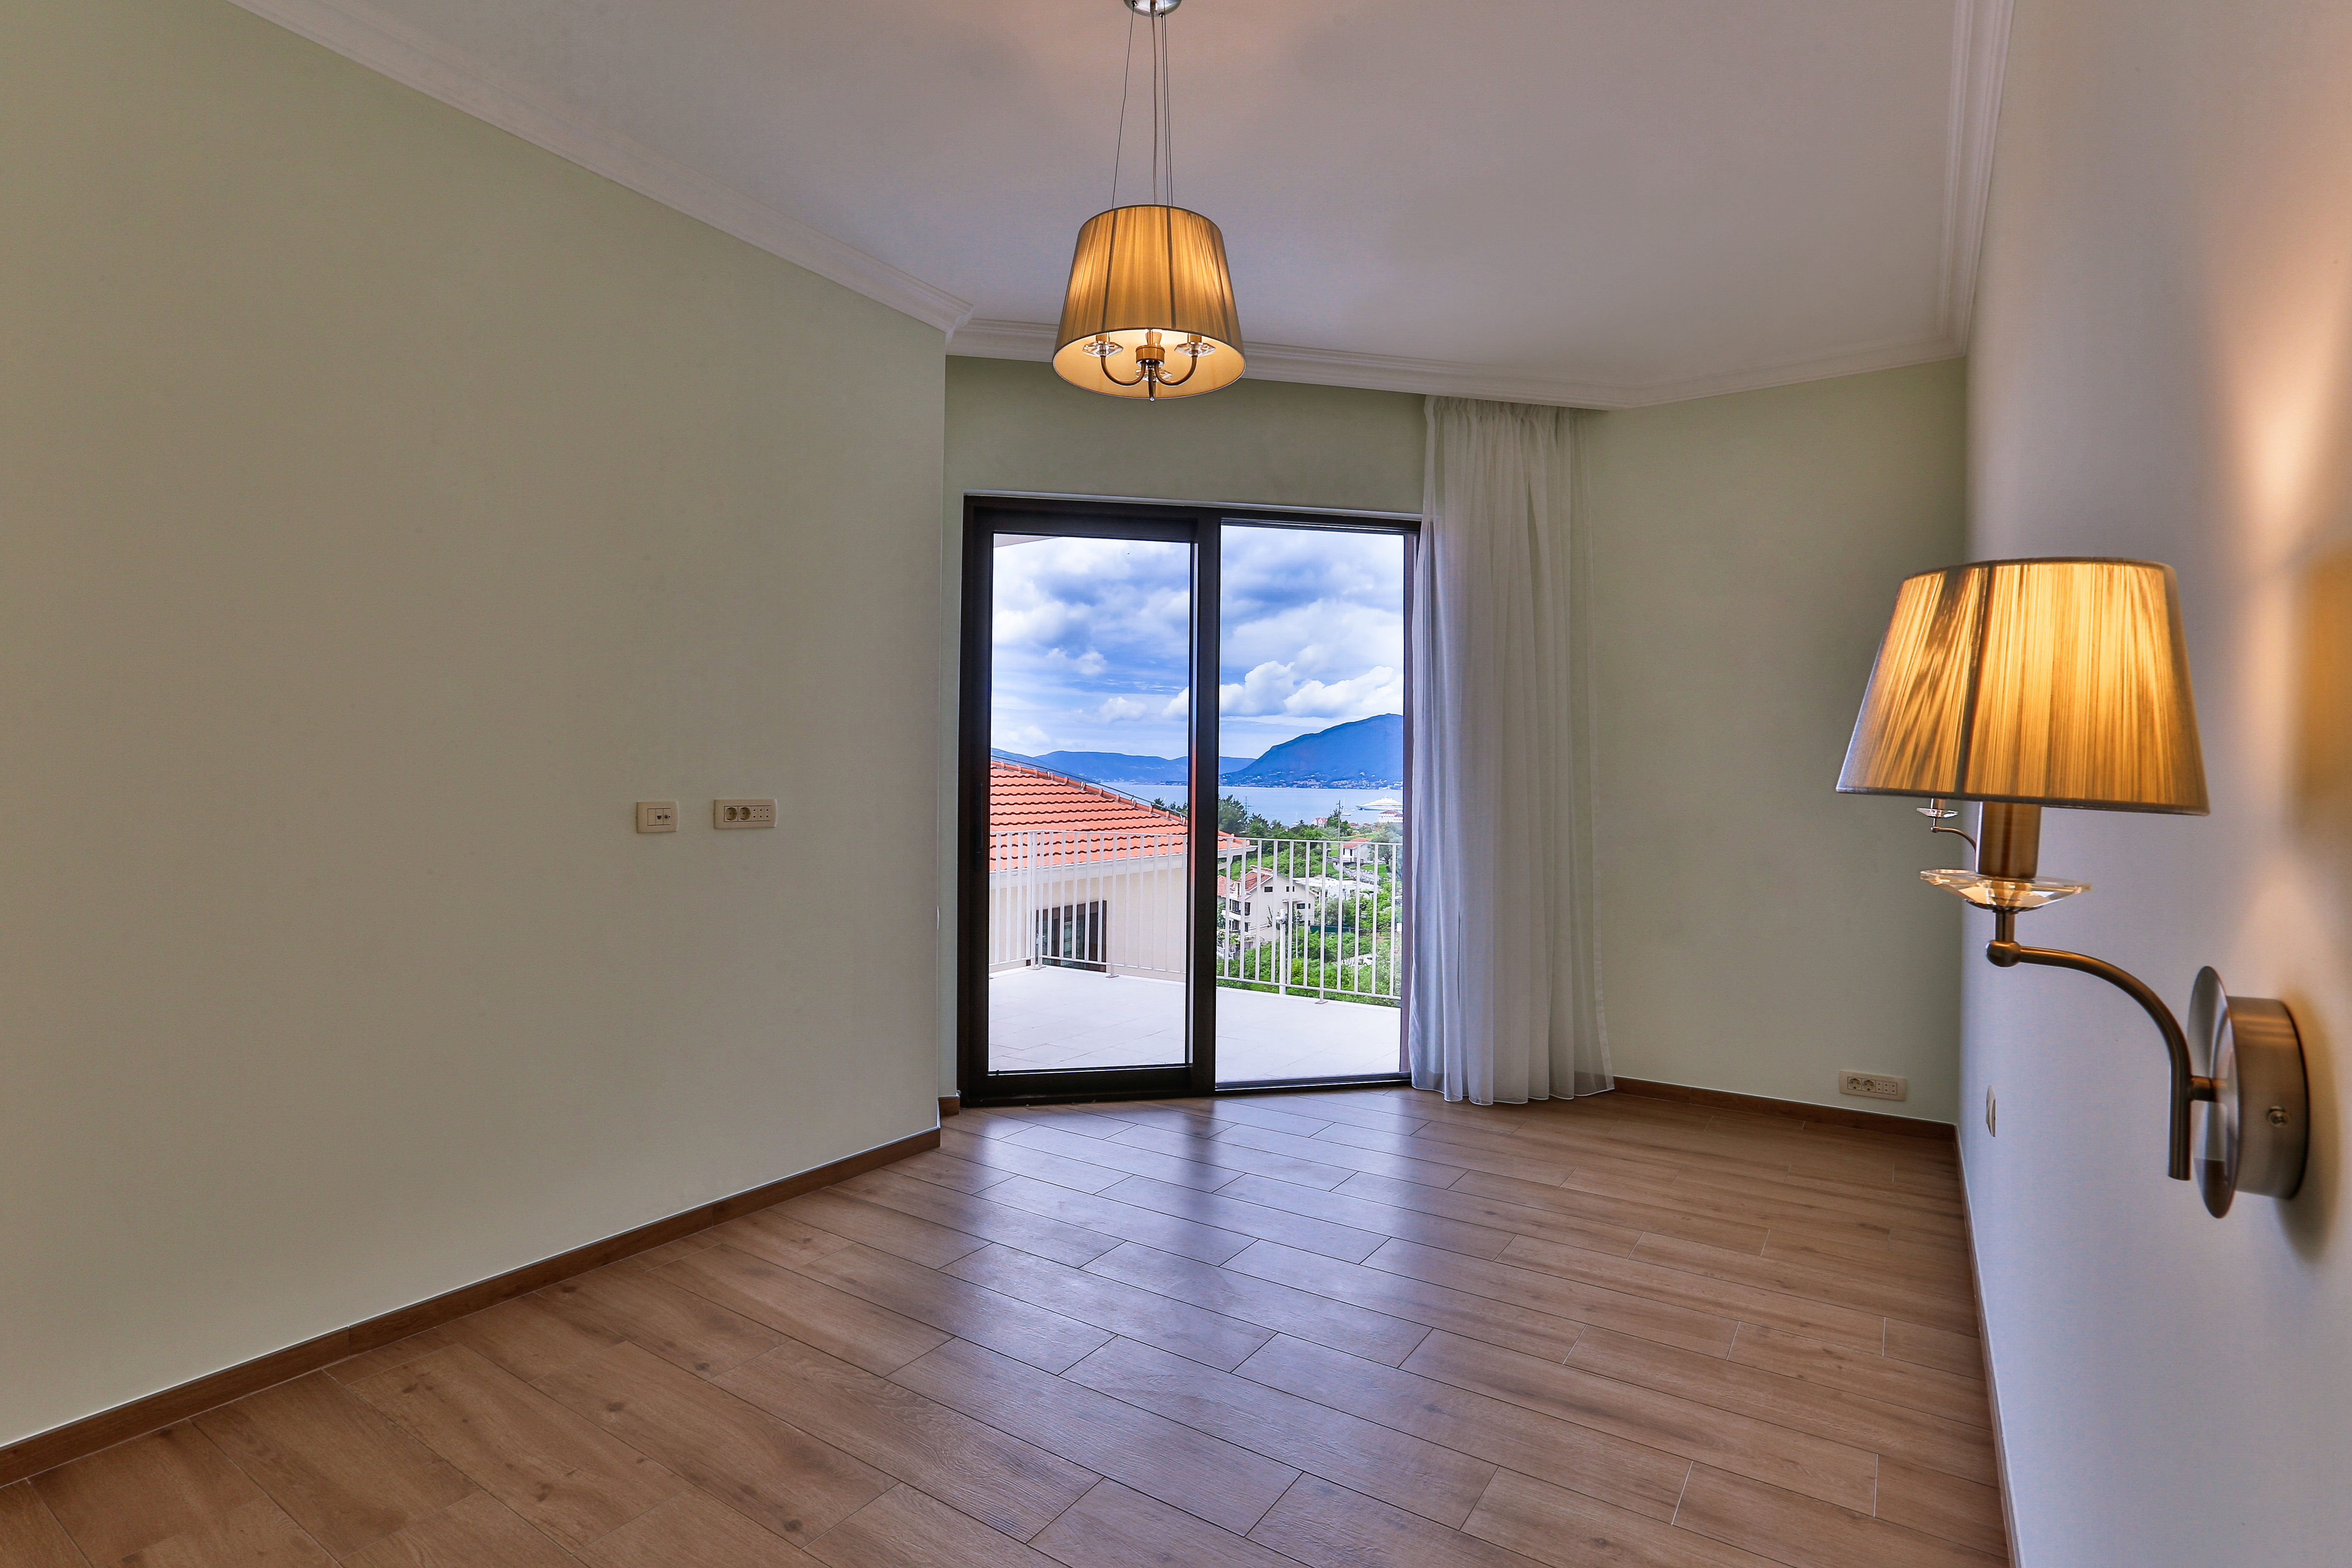 Luxurious villa overlooking the sea with a private pool in Tivat